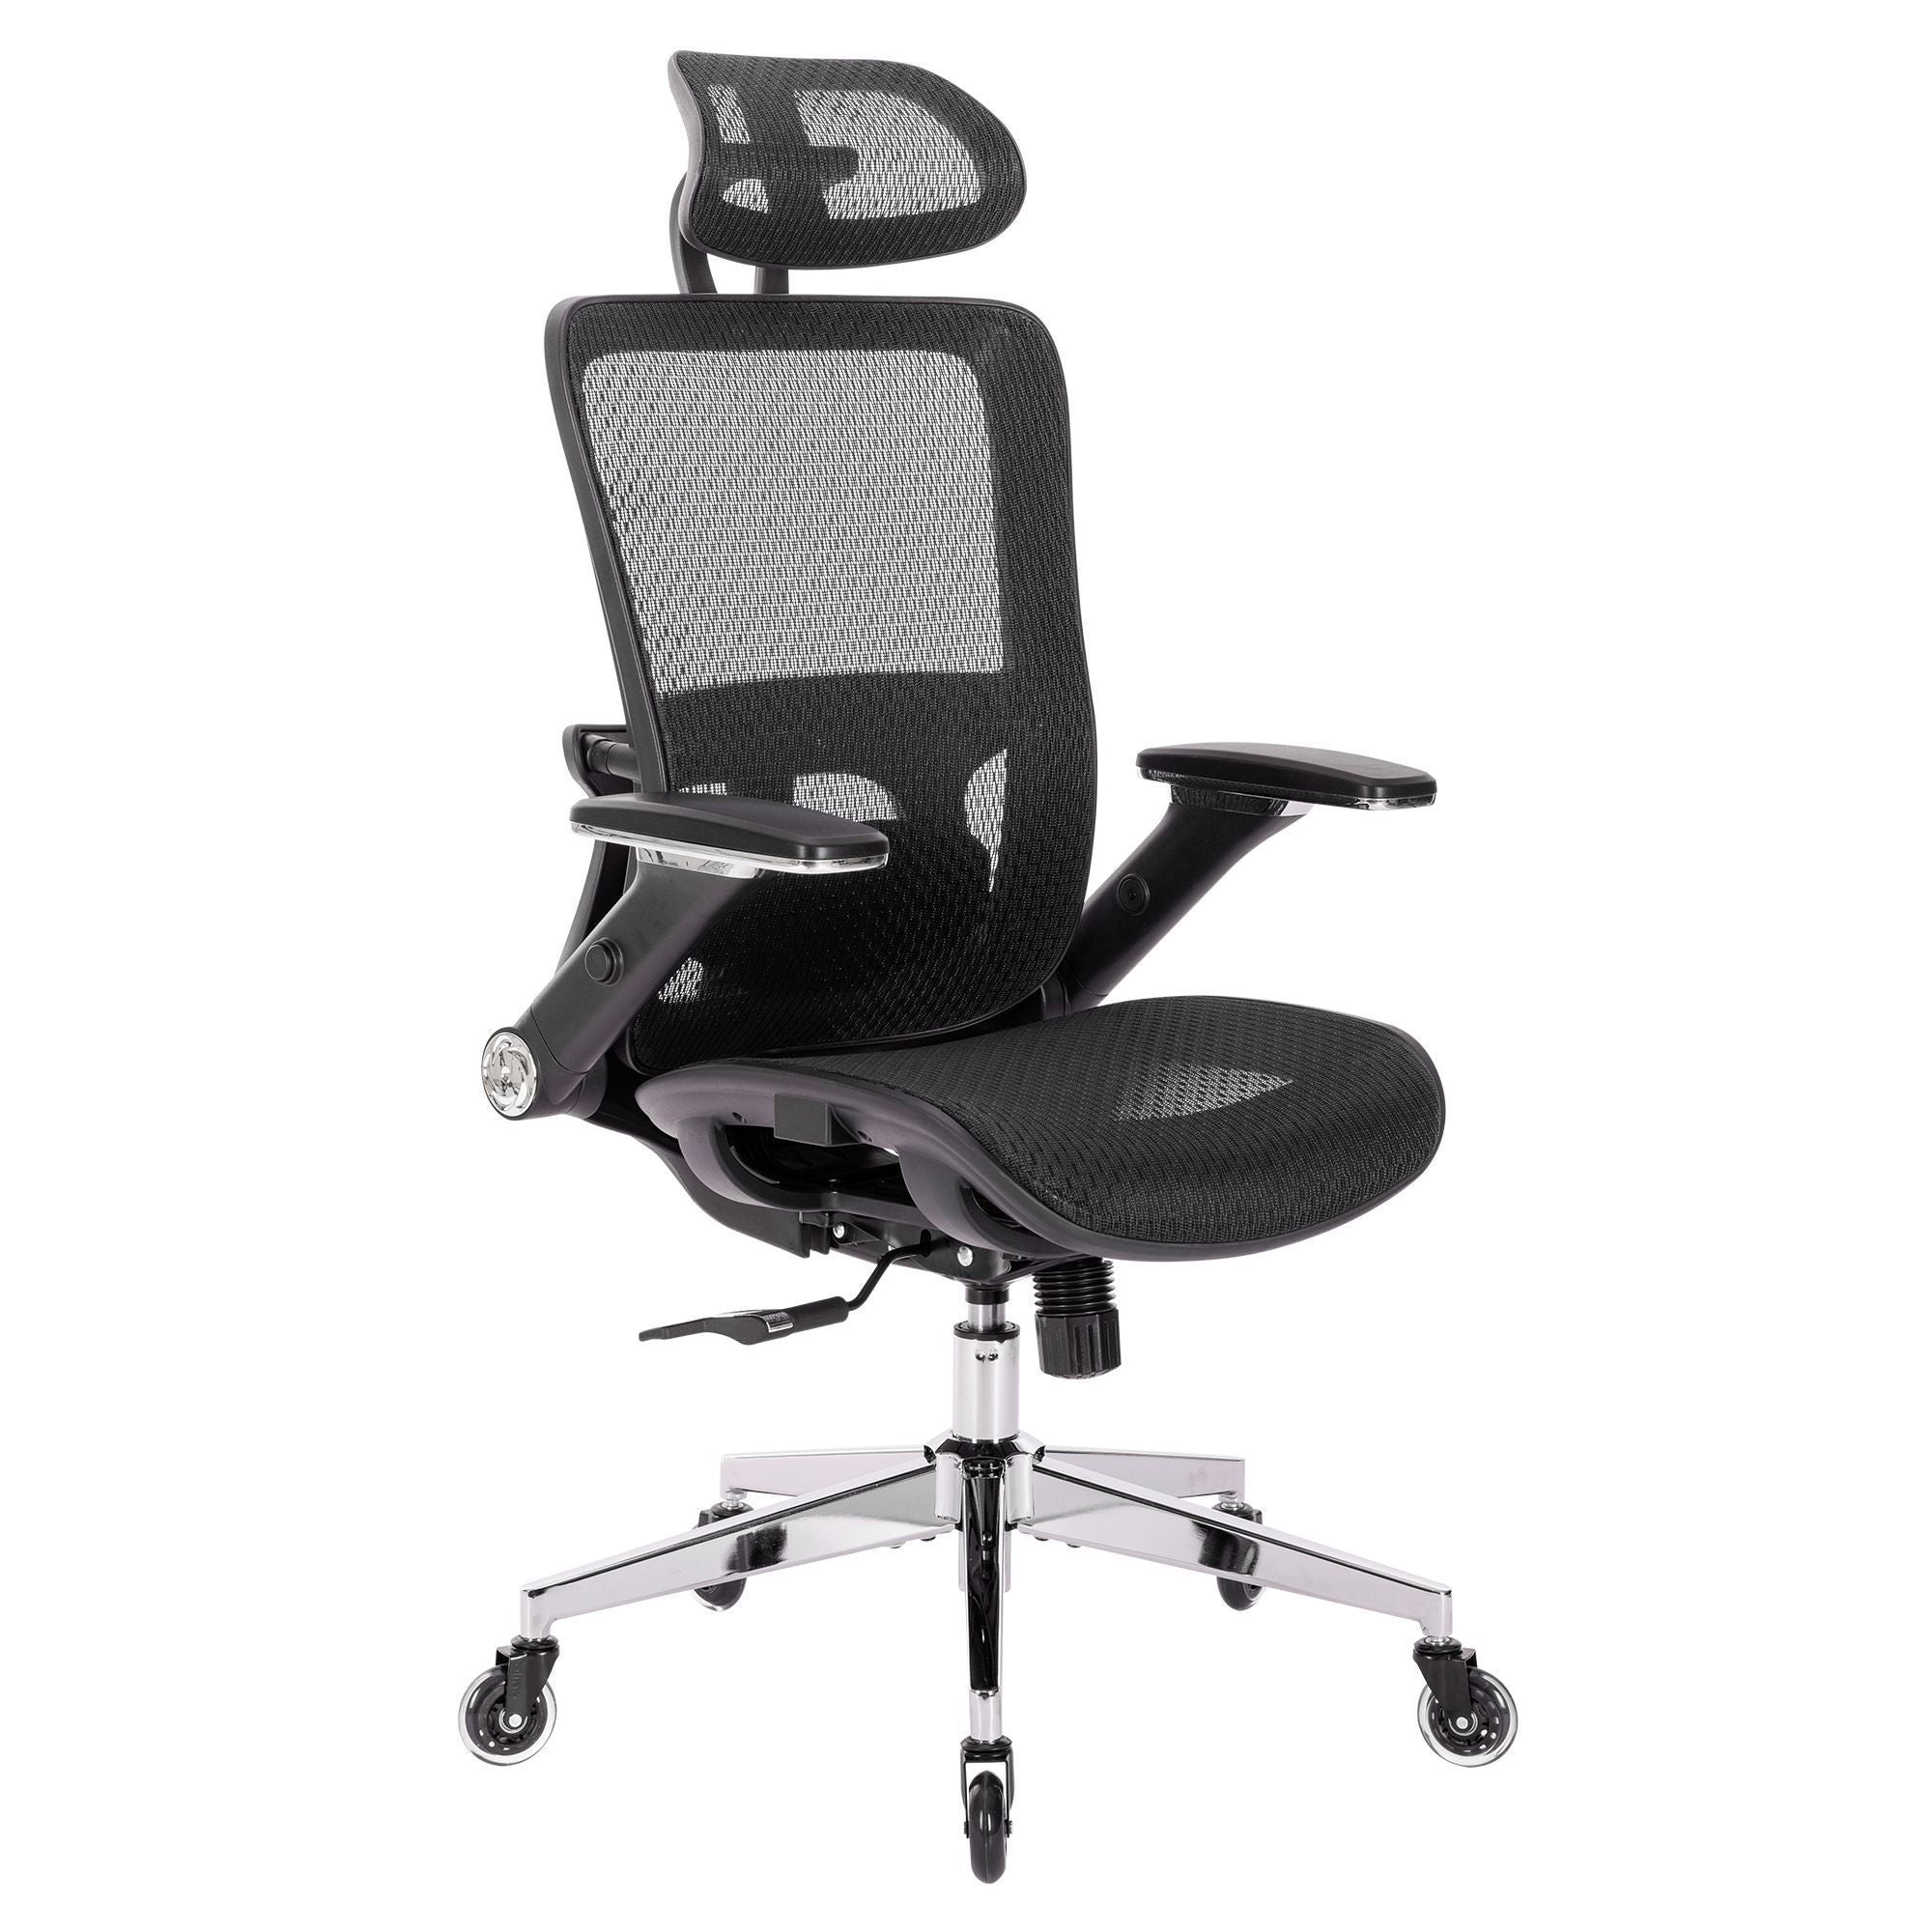 Black Ergonomic Mesh Office Chair, High Back - Adjustable Headrest with Flip-Up Arms, Tilt and lock Function, Lumbar Support and blade Wheels